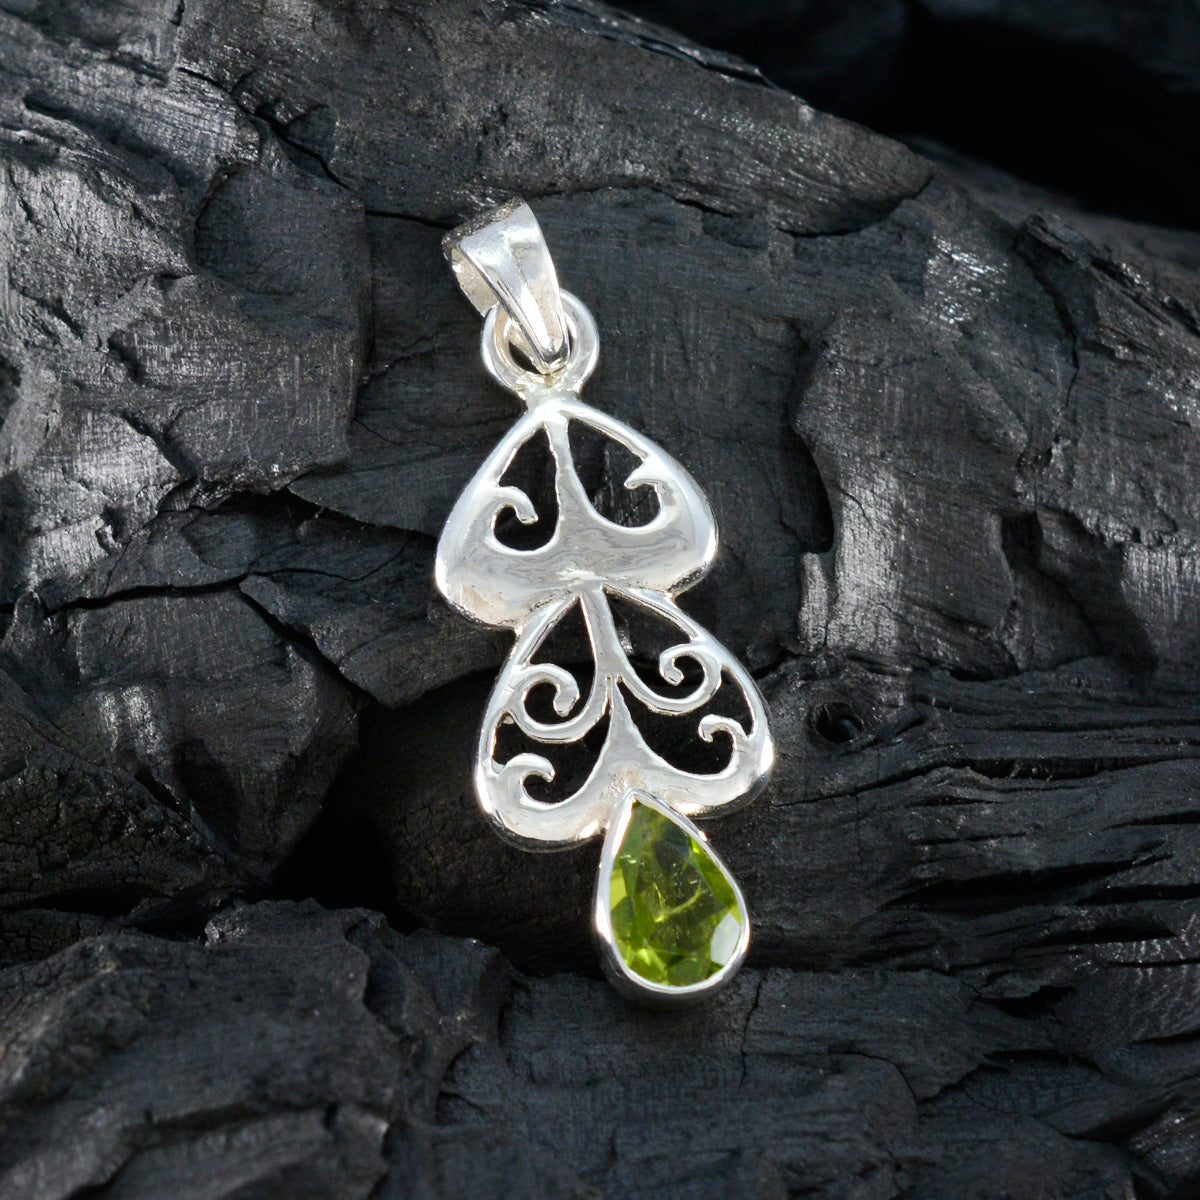 Riyo Spunky Gemstone Pear Faceted Green Peridot 959 Sterling Silver Pendant Gift For Teachers Day